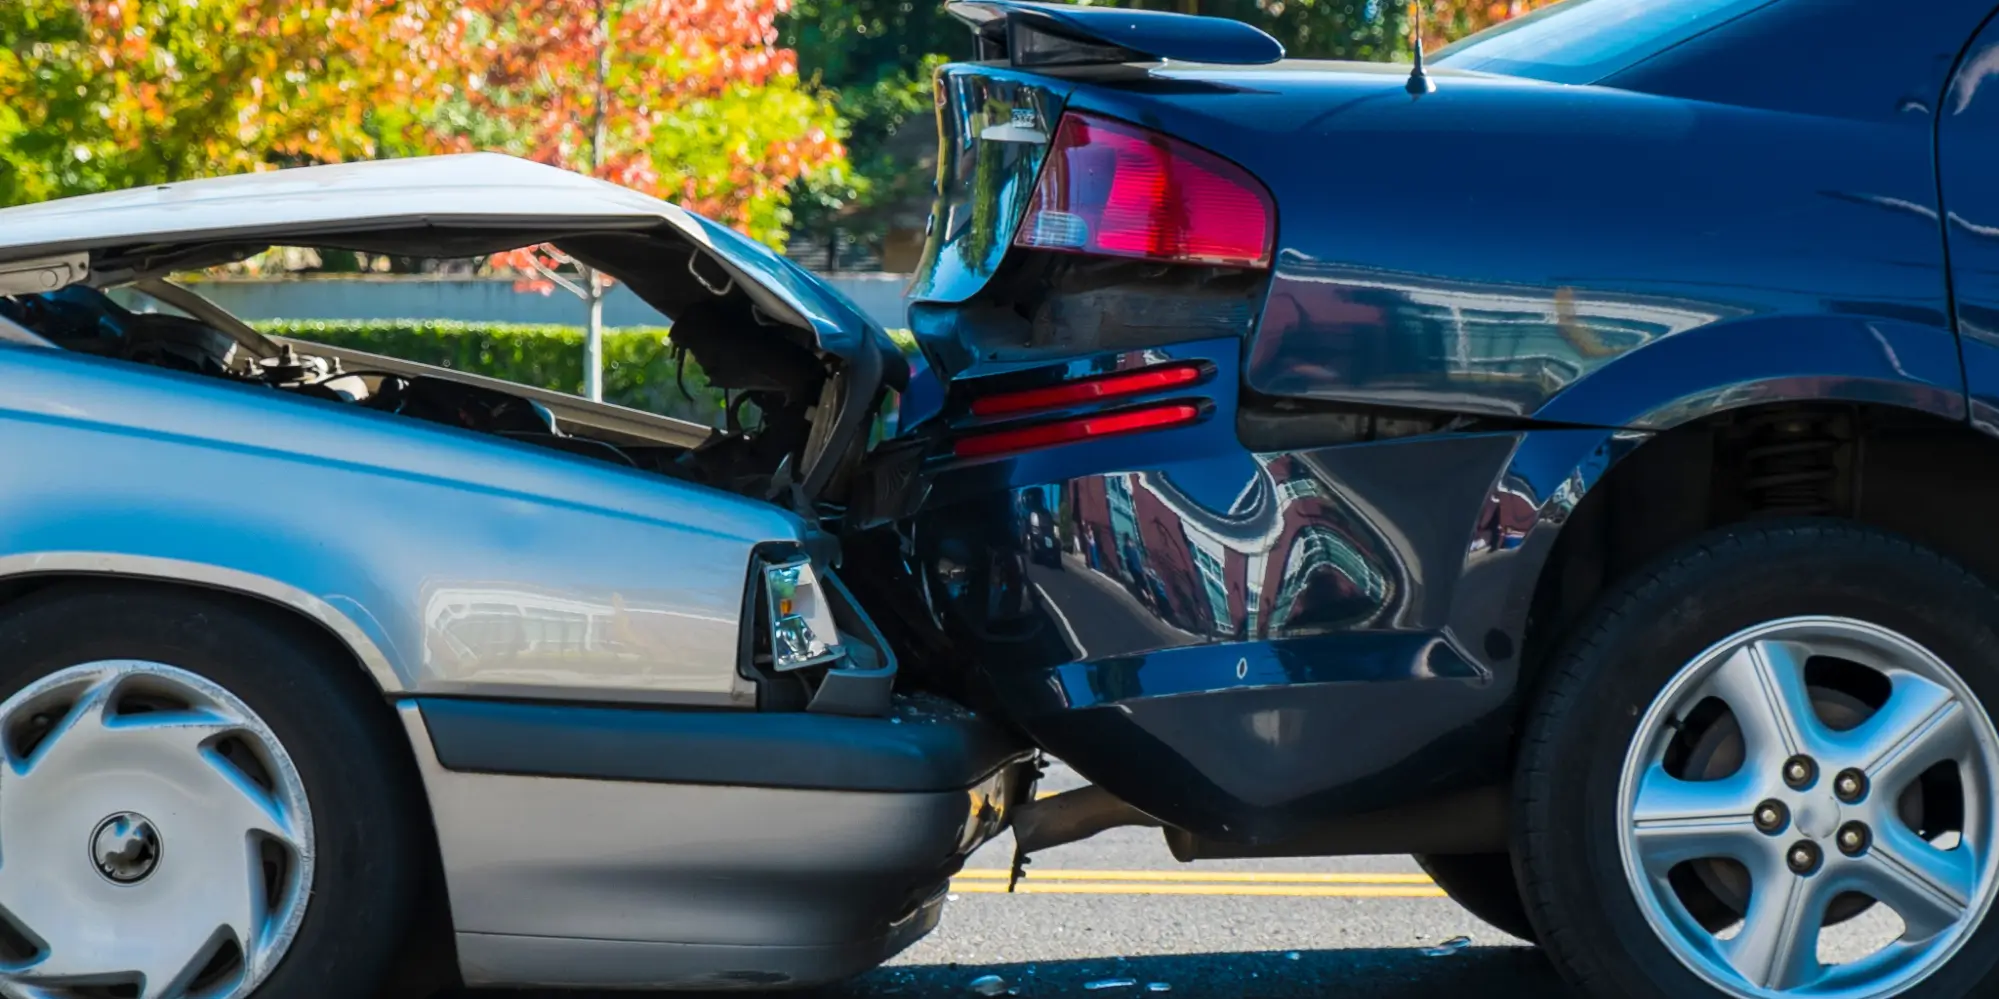 If you’ve been injured in a car accident, there is no time to waste. Contact our Henderson car accident lawyers today.